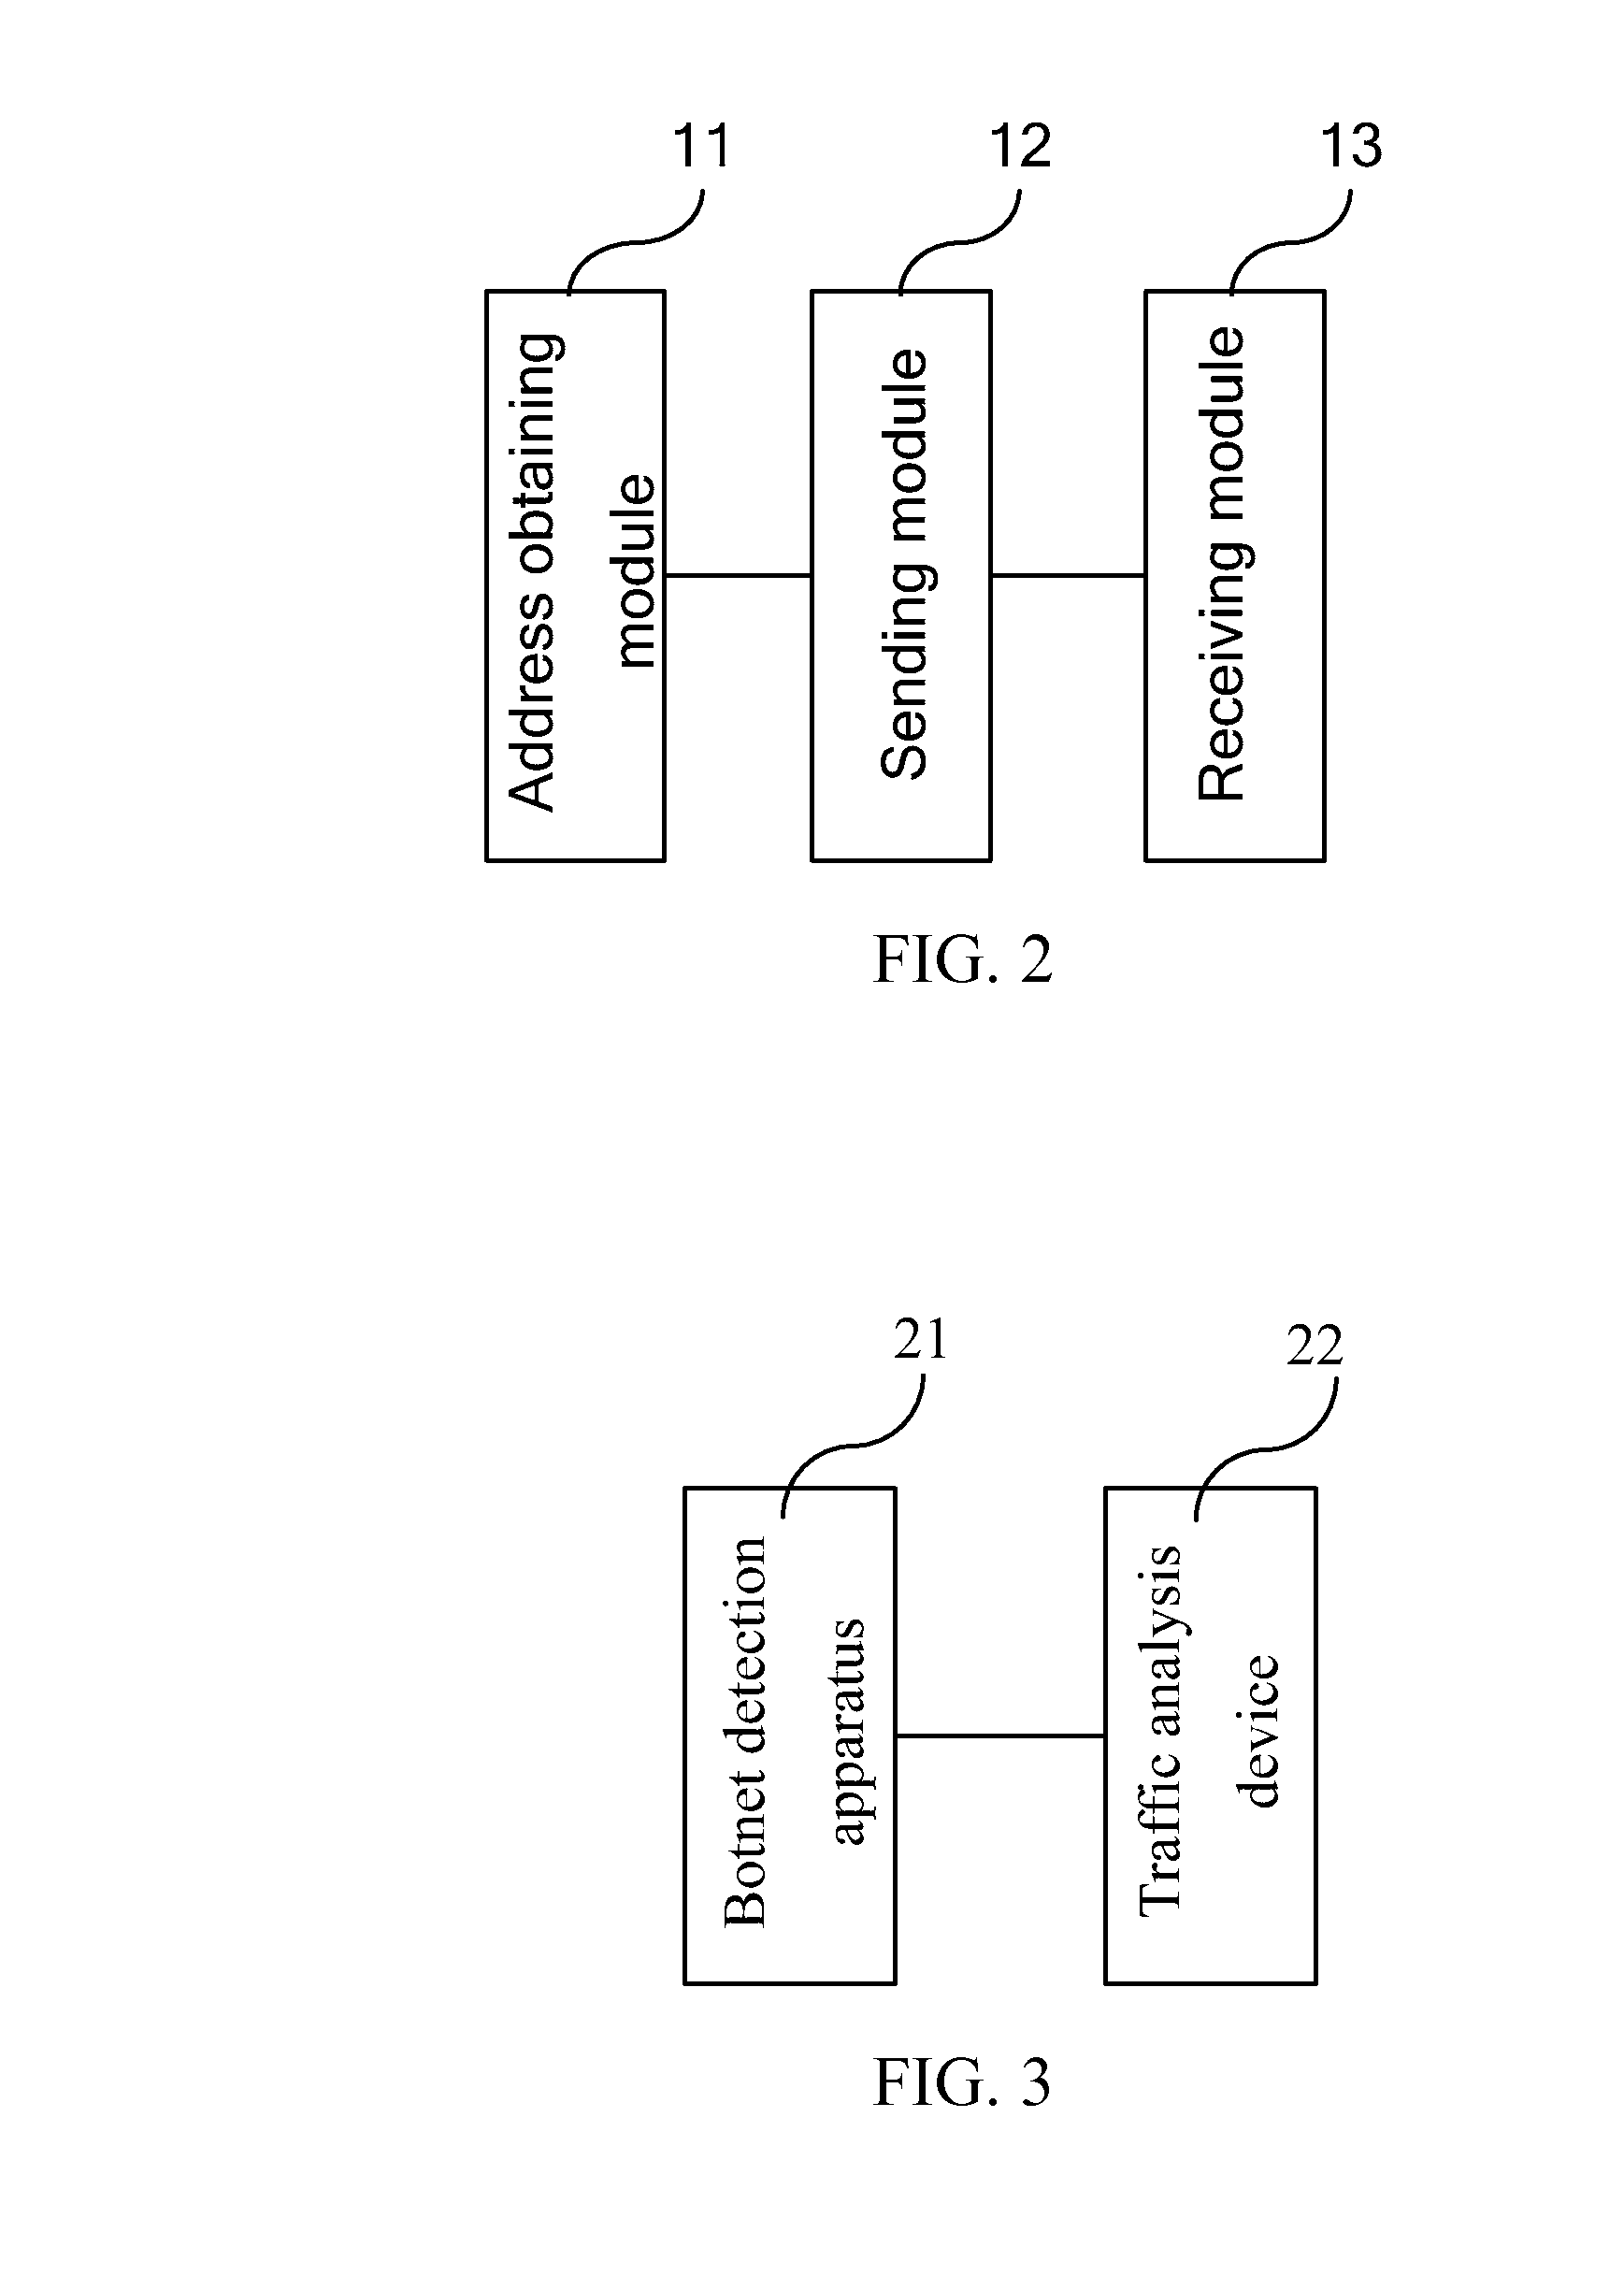 Method, apparatus and system for detecting botnet